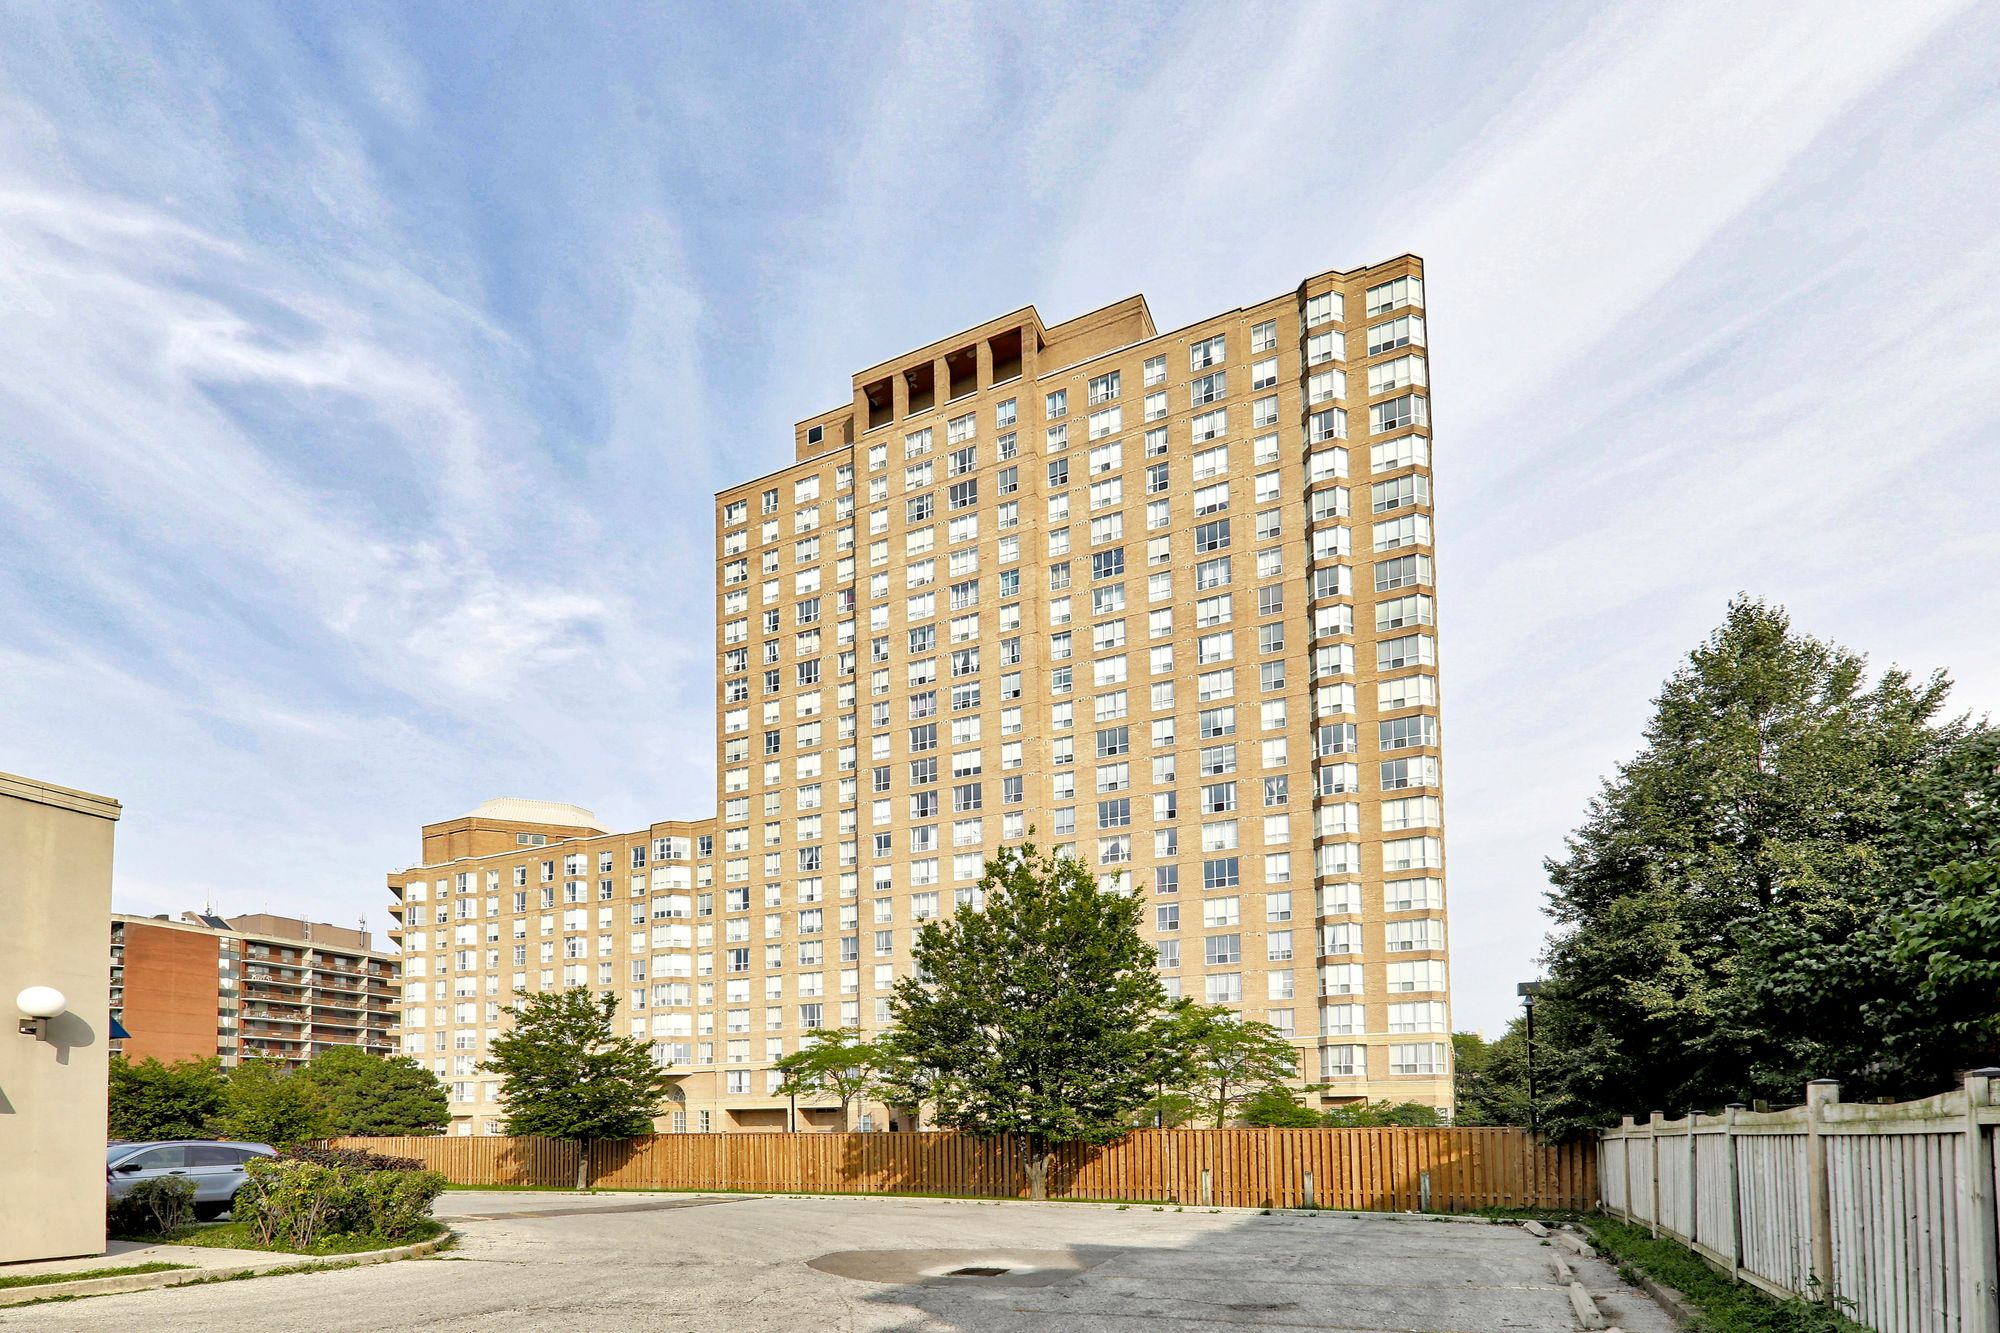 21 Overlea Blvd. This condo at Jockey Club is located in  East York, Toronto - image #1 of 6 by Strata.ca